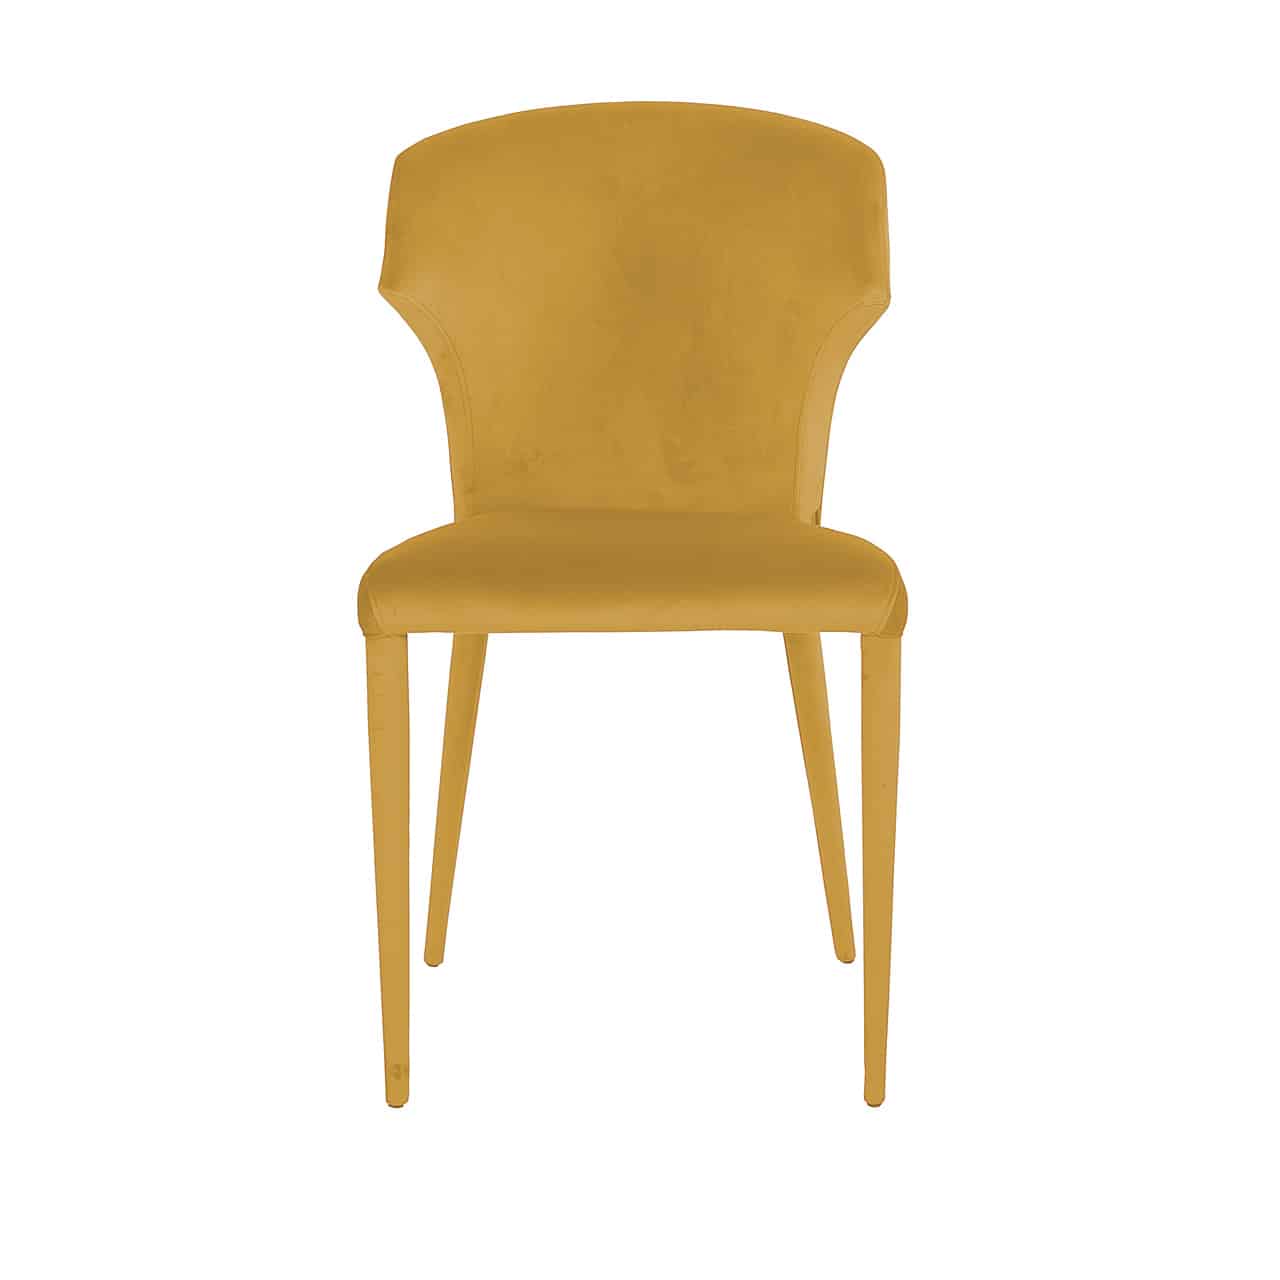 PIPER chair yellow